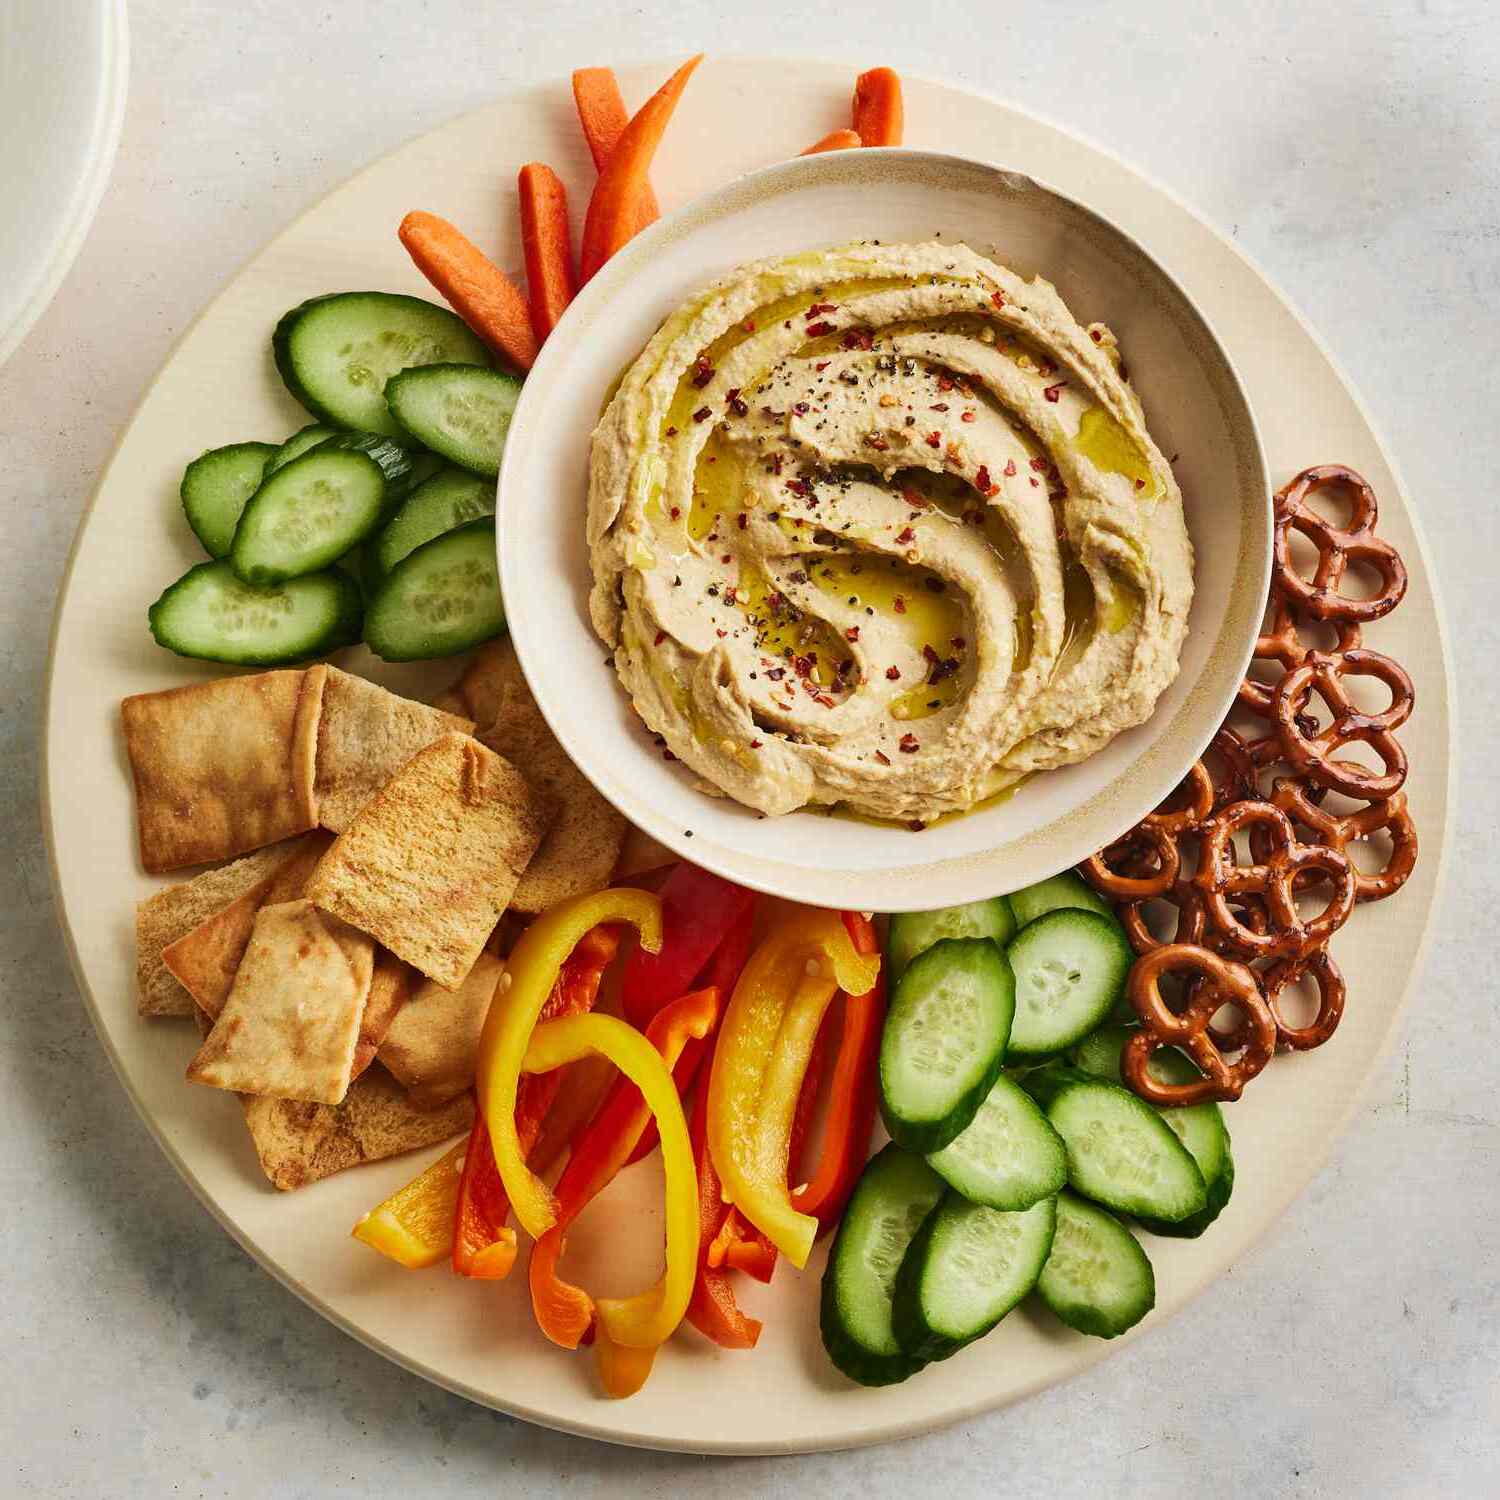 13-facts-about-international-hummus-day-may-13th